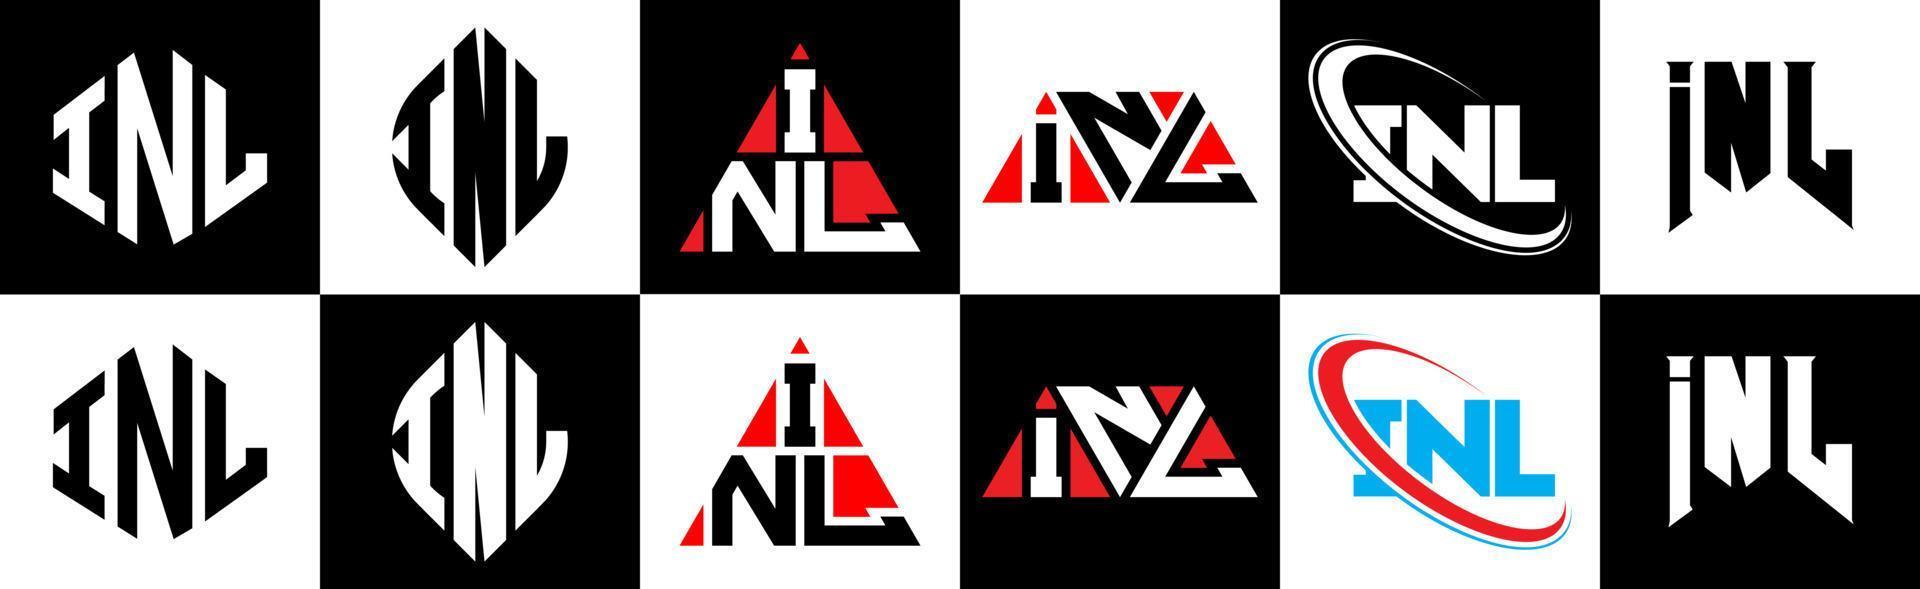 INL letter logo design in six style. INL polygon, circle, triangle, hexagon, flat and simple style with black and white color variation letter logo set in one artboard. INL minimalist and classic logo vector